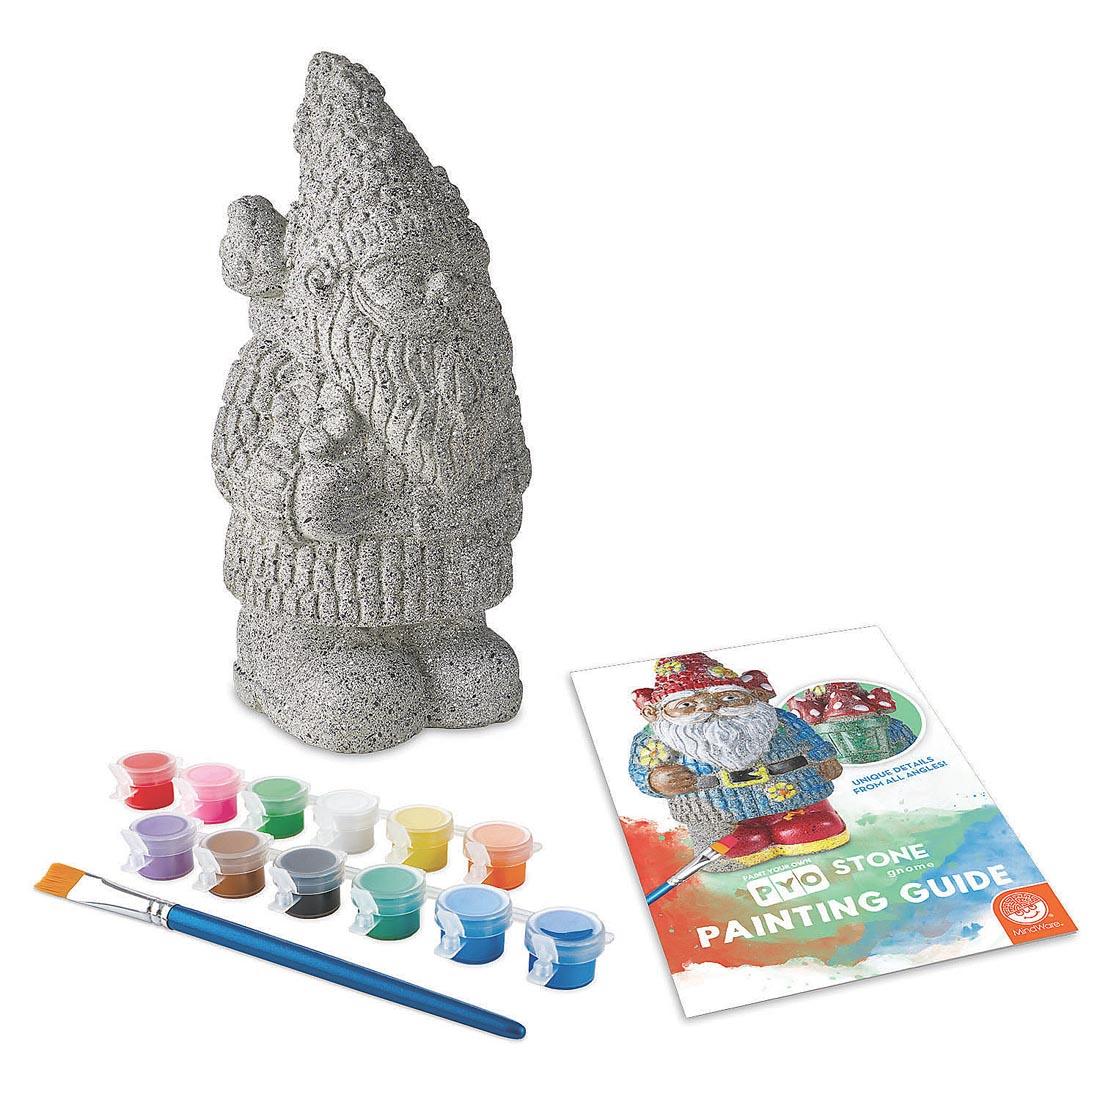 Components of the Paint Your Own Stone Gnome Kit